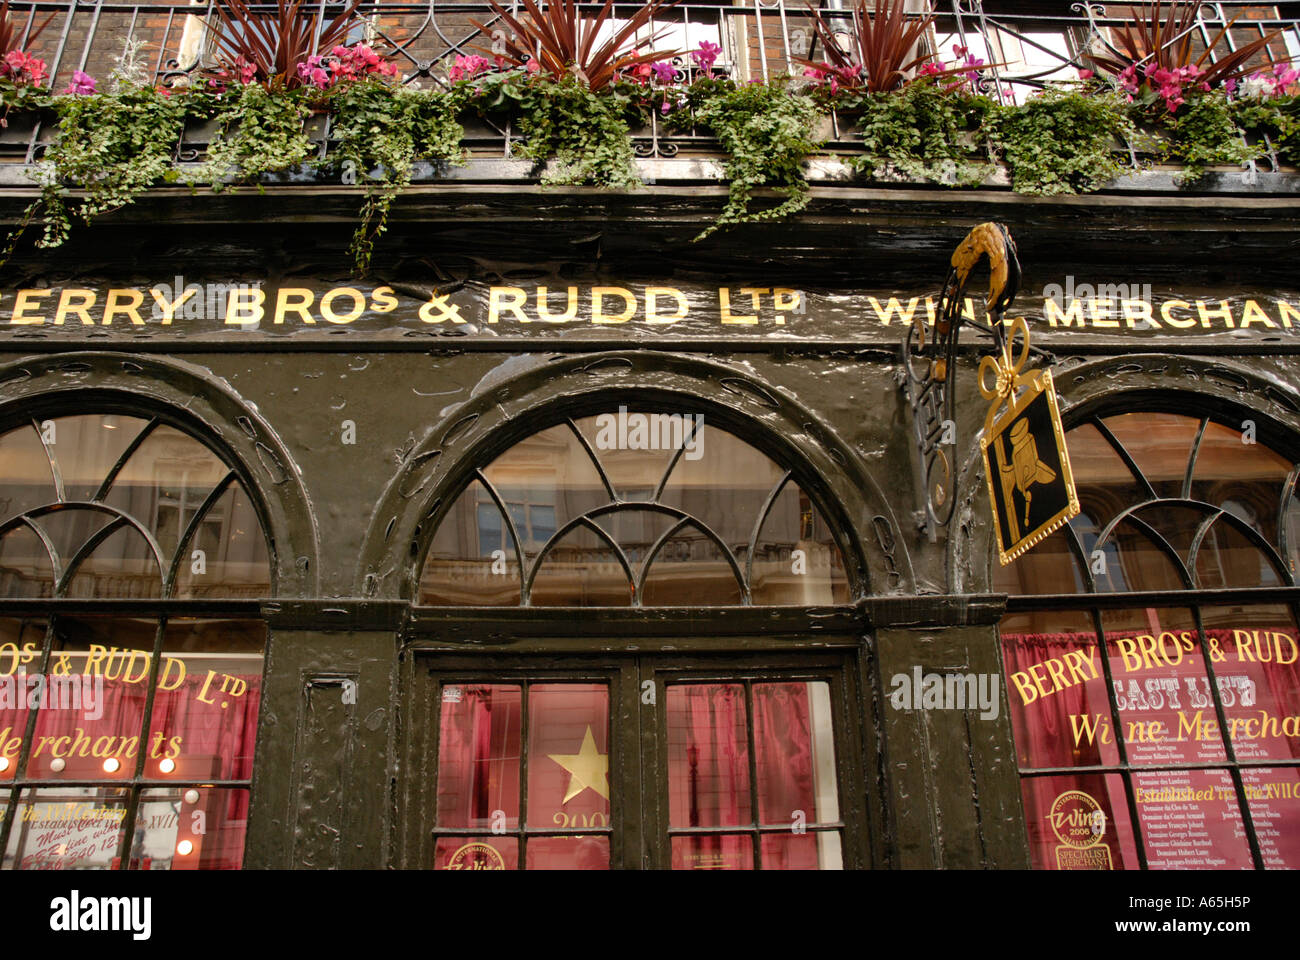 Exterior of Berry Bros and Rudd fine wine merchants dating back to the 1700s St James's Street London Stock Photo